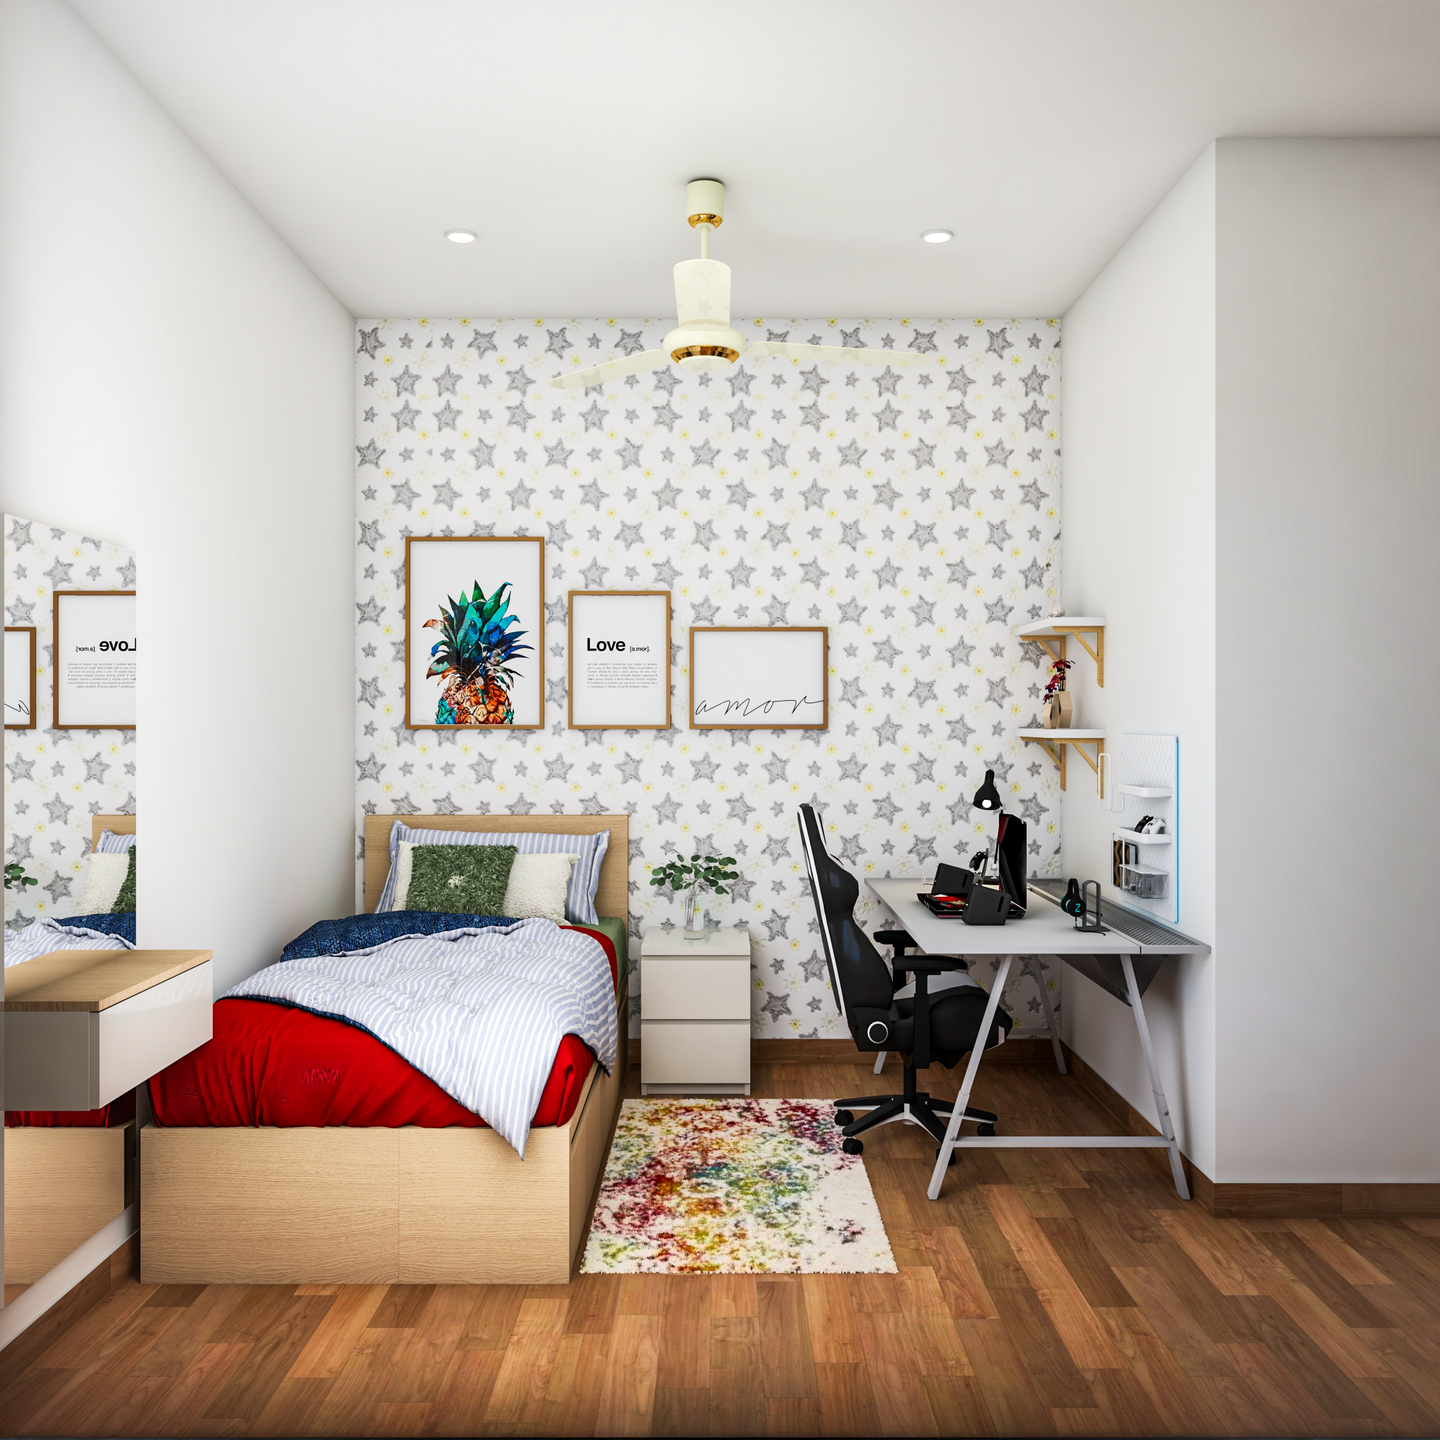 Kid's Bedroom With Study And Dresser - Livspace